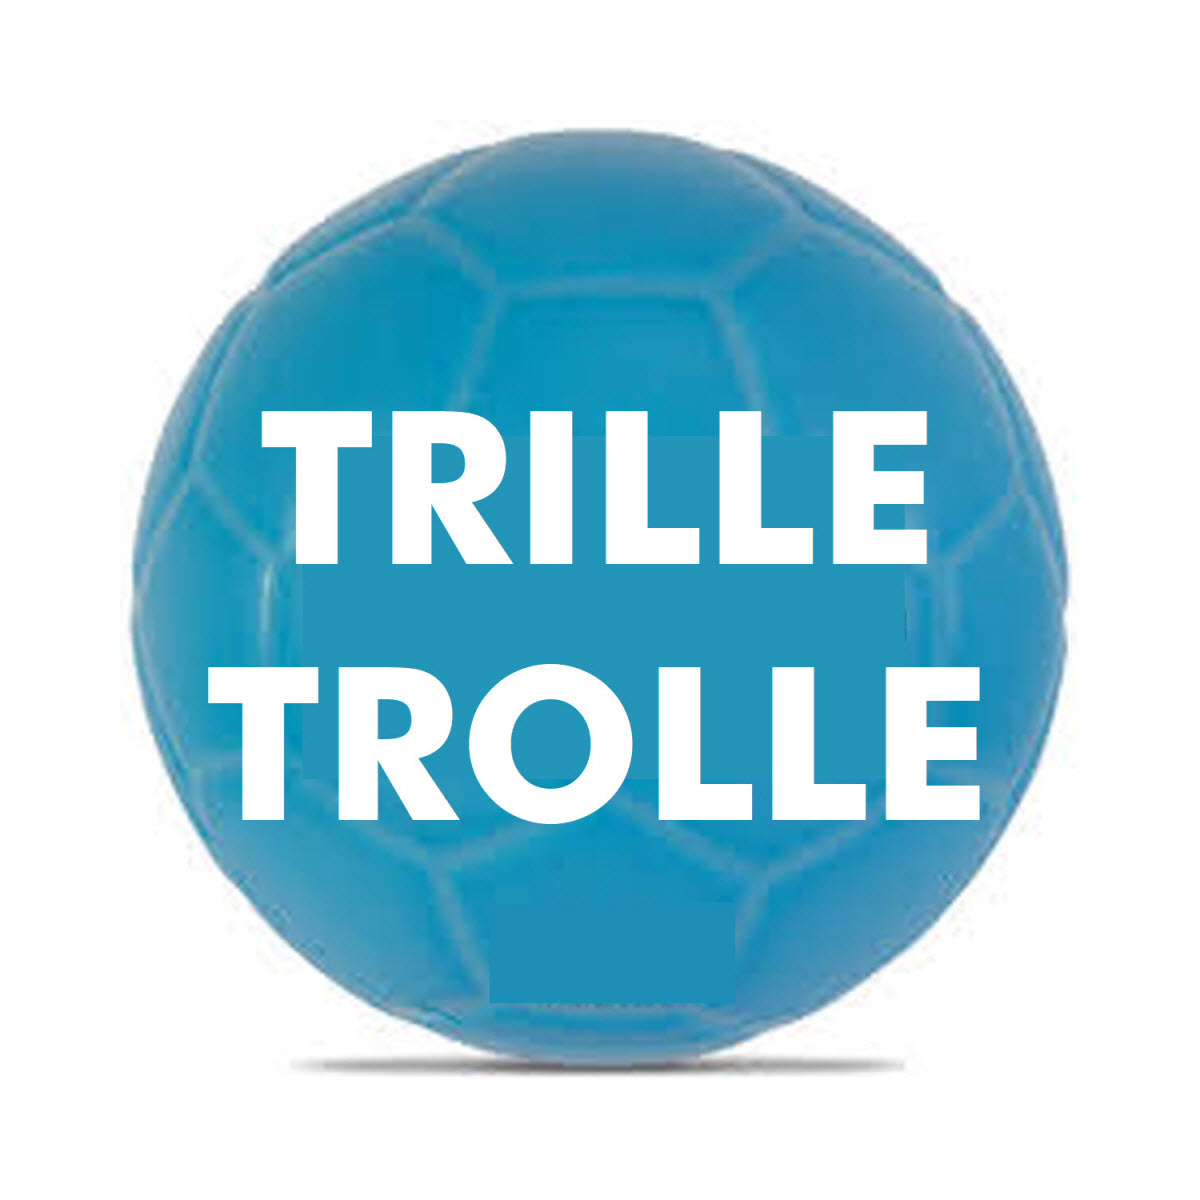 Trille trolle bold